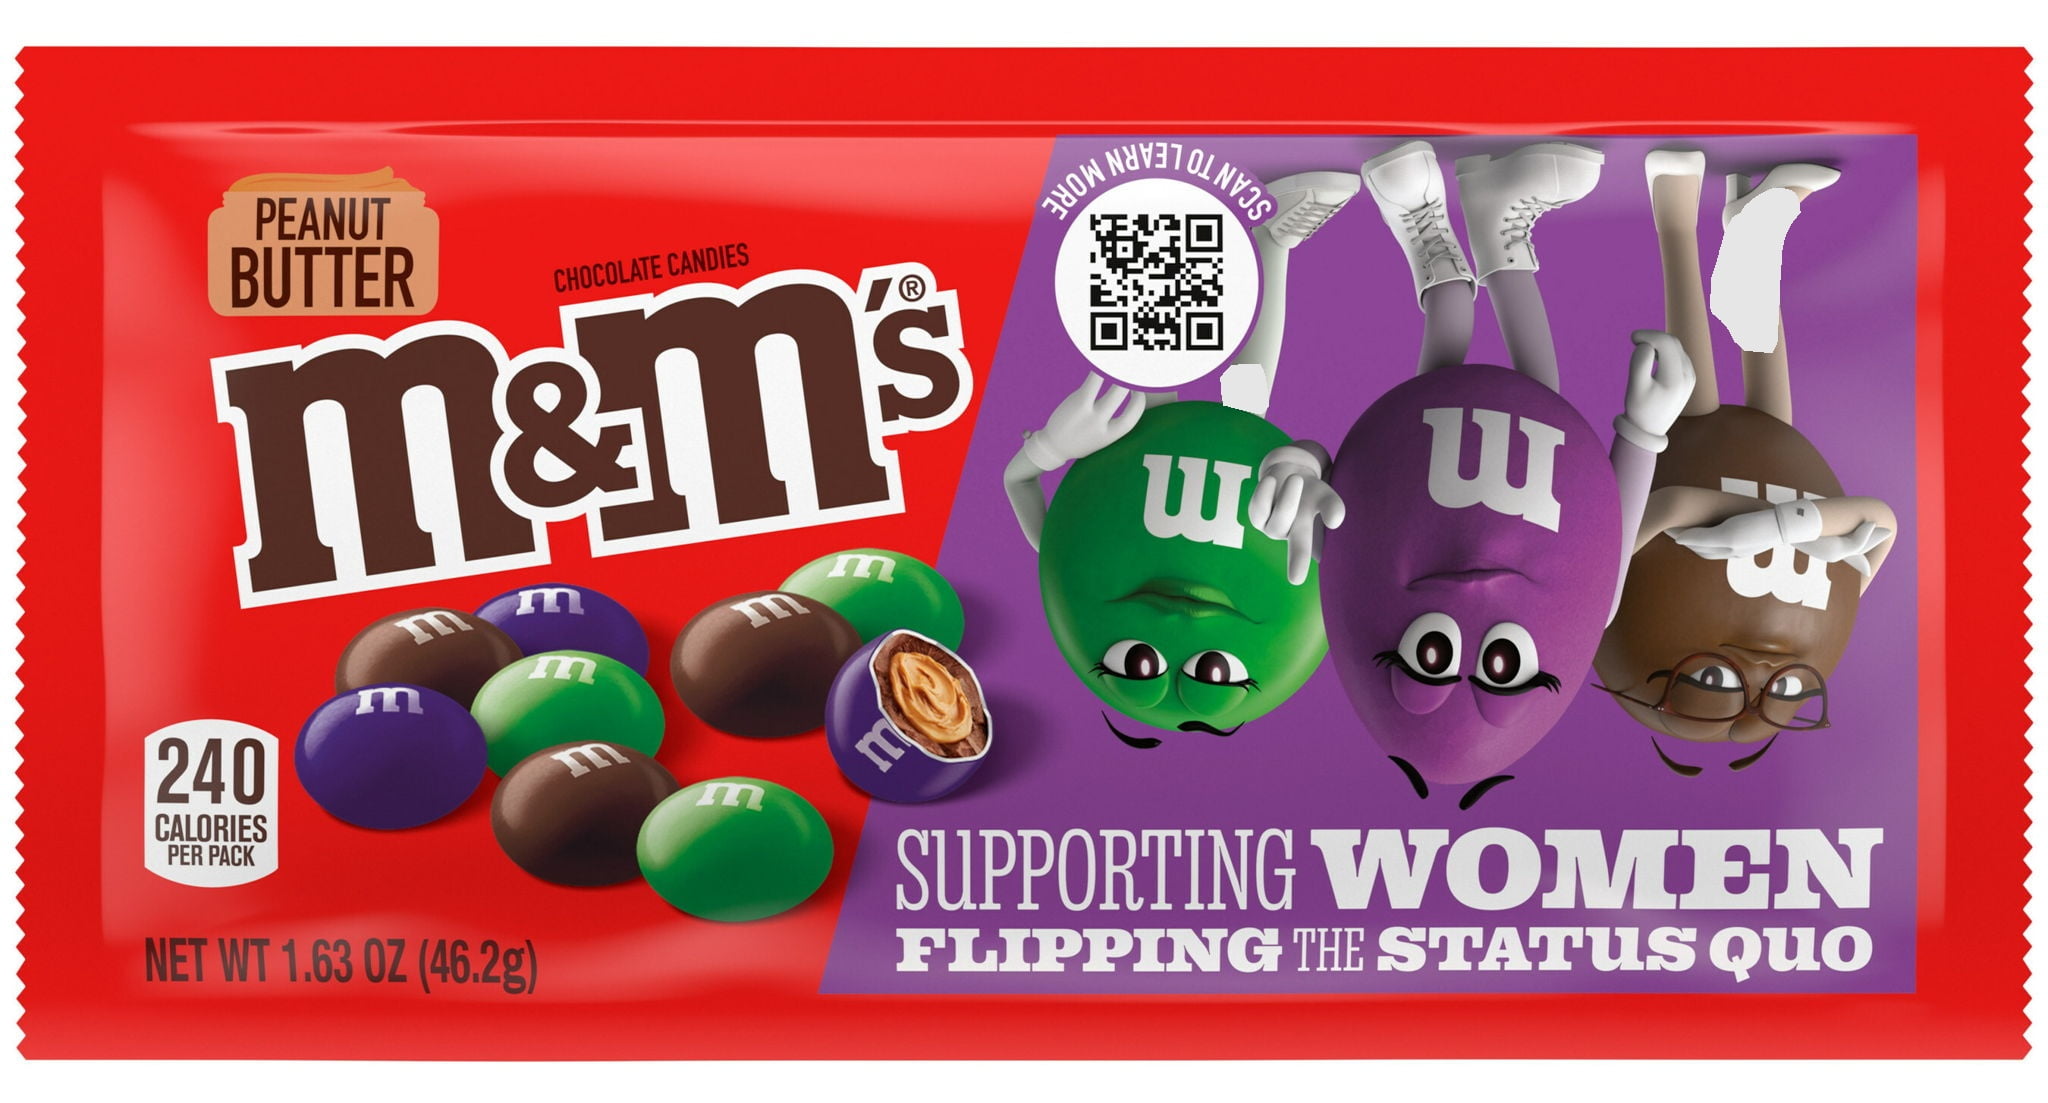 M&M'S Limited Edition Peanut Butter Milk Chocolate Candy, Featuring Purple  Candy, 1.63 Ounce Bag - 24 Count Display Box 